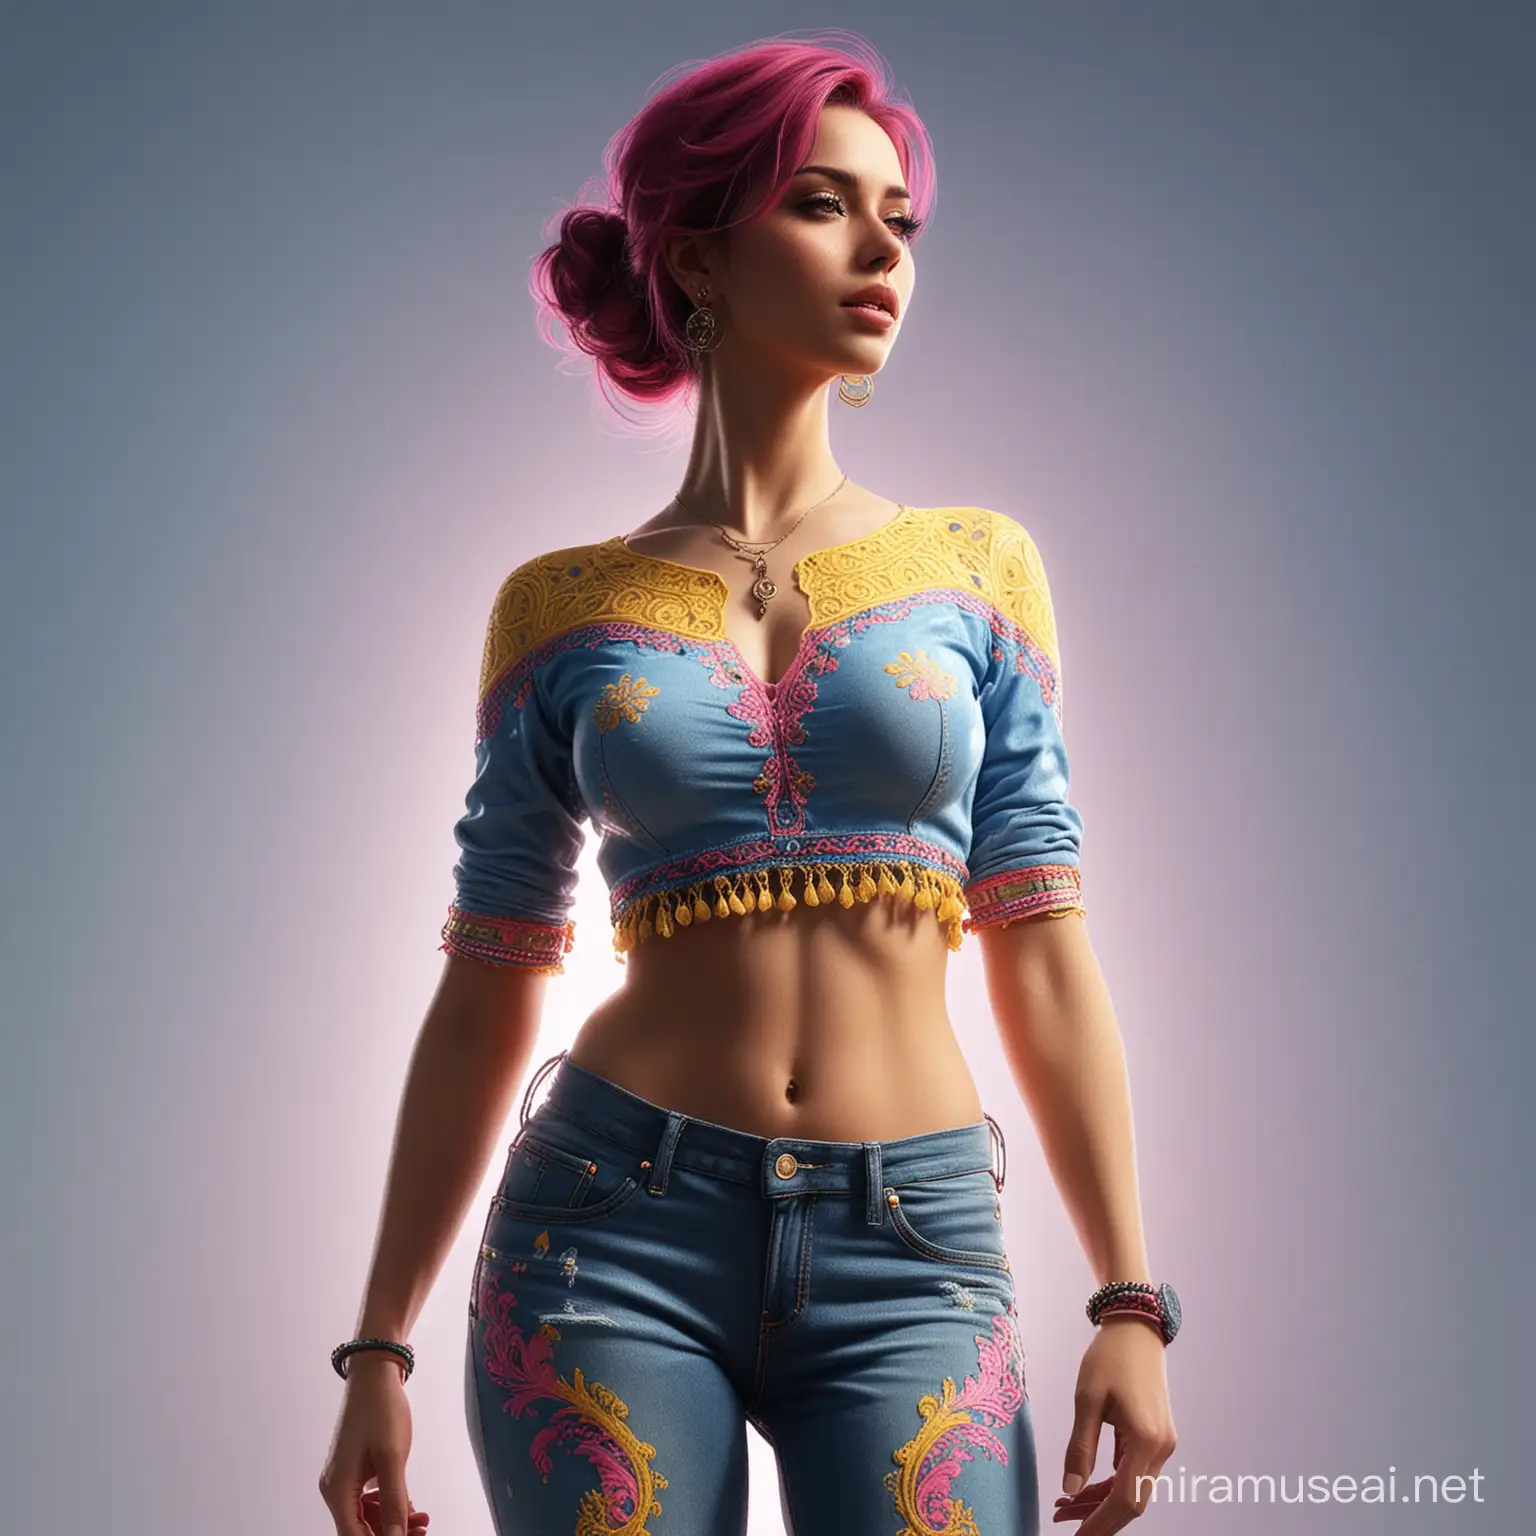 high quality, 8K Ultra HD, highly detailed, super realistic, masterpiece of the silhouette of a woman with a white croptop design like arabic art and colors pink yellow  and blue and jeans, translucent body art,   colorful, cmyk colors, backlit, enhance beauty, full body, extremely hyper detailed, cinematic 8k